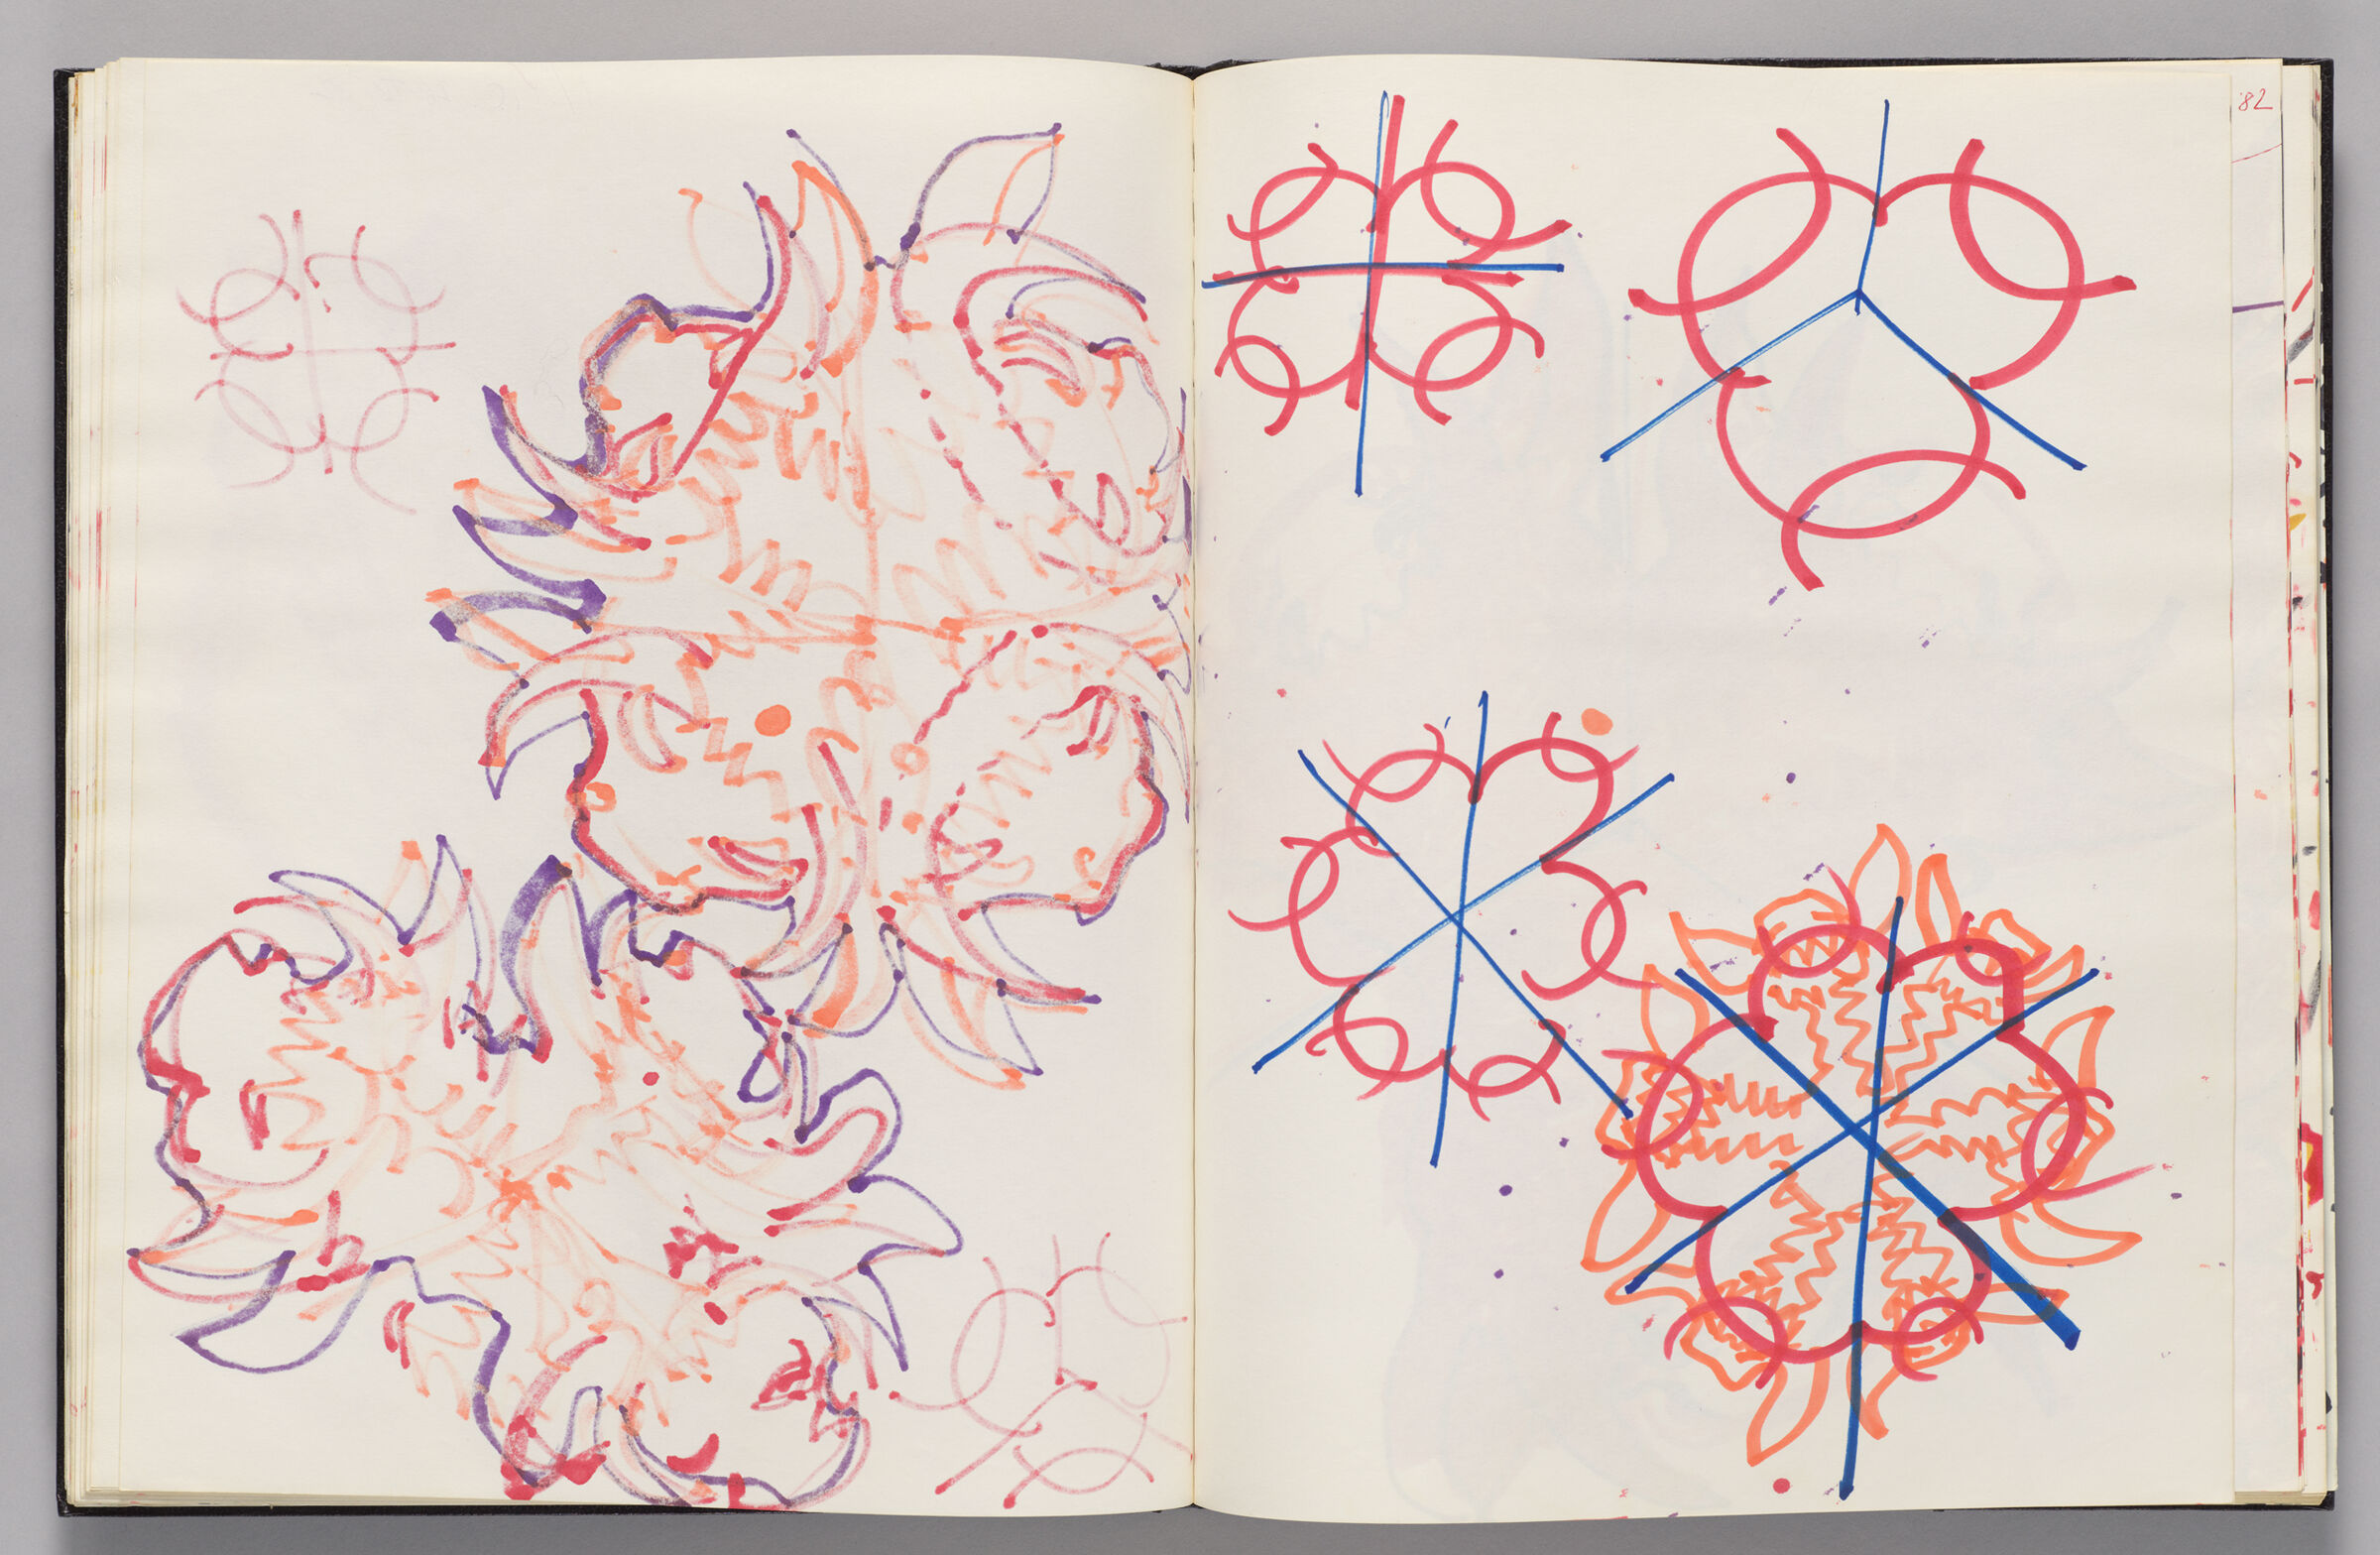 Untitled (Bleed-Through Of Previous Page, Left Page); Untitled (Minotaur Heads, Aerial View, Right Page)